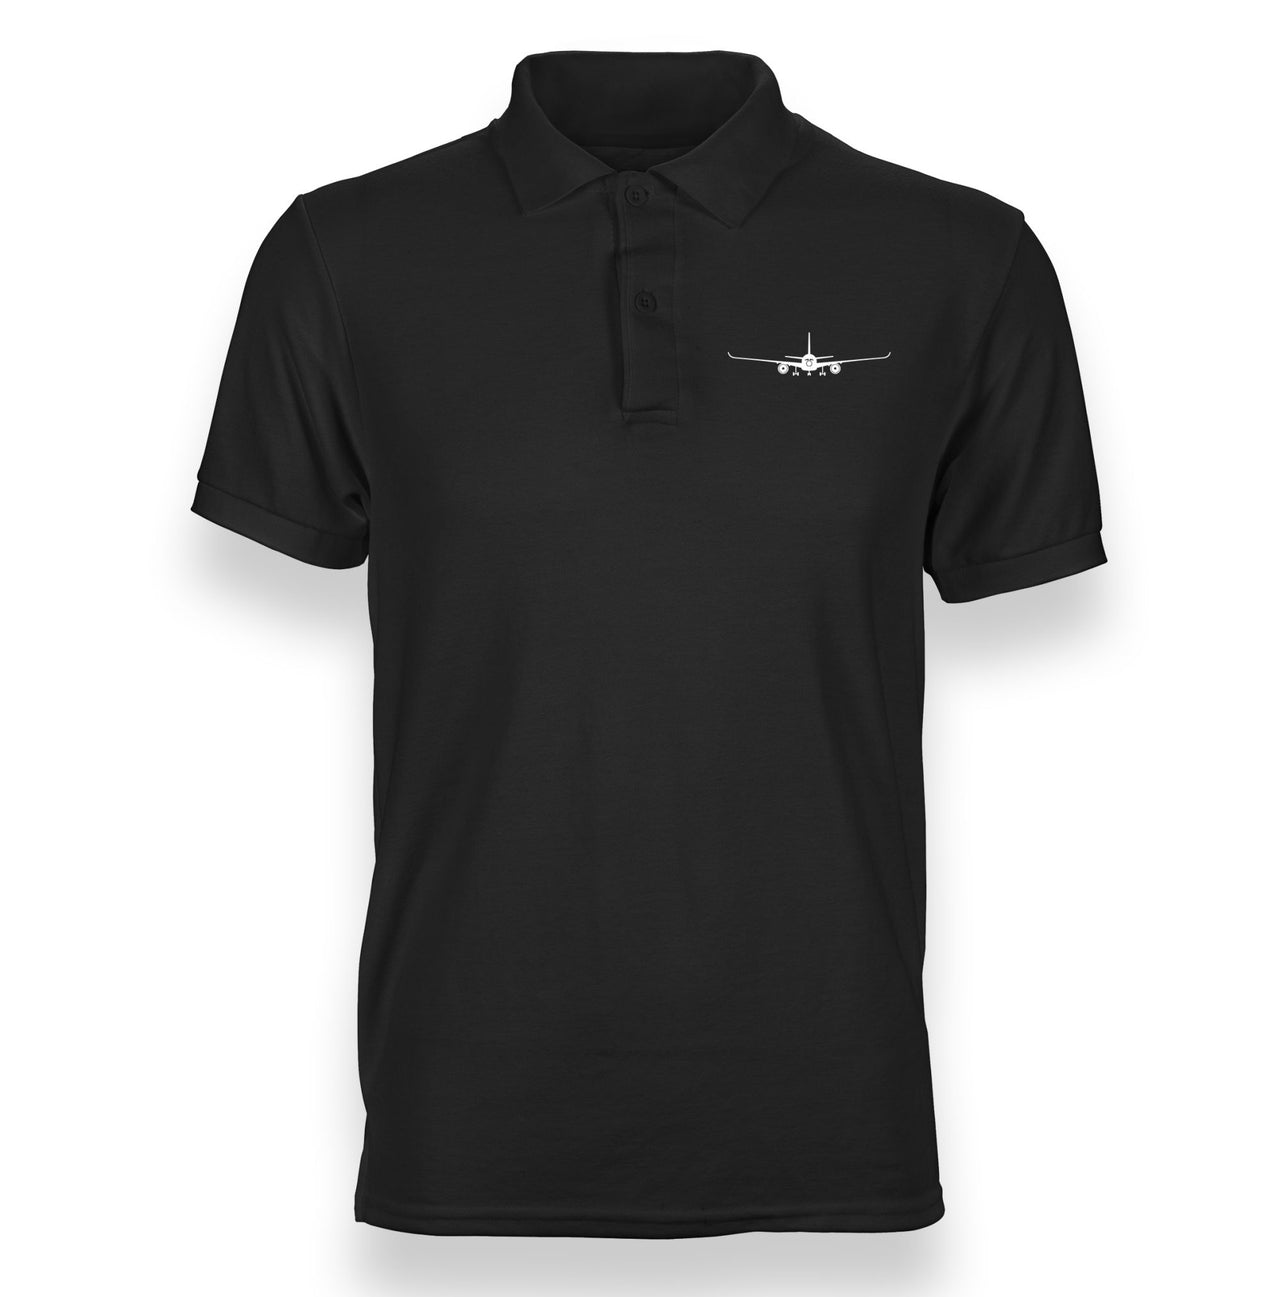 Airbus A350 Silhouette Designed "WOMEN" Polo T-Shirts